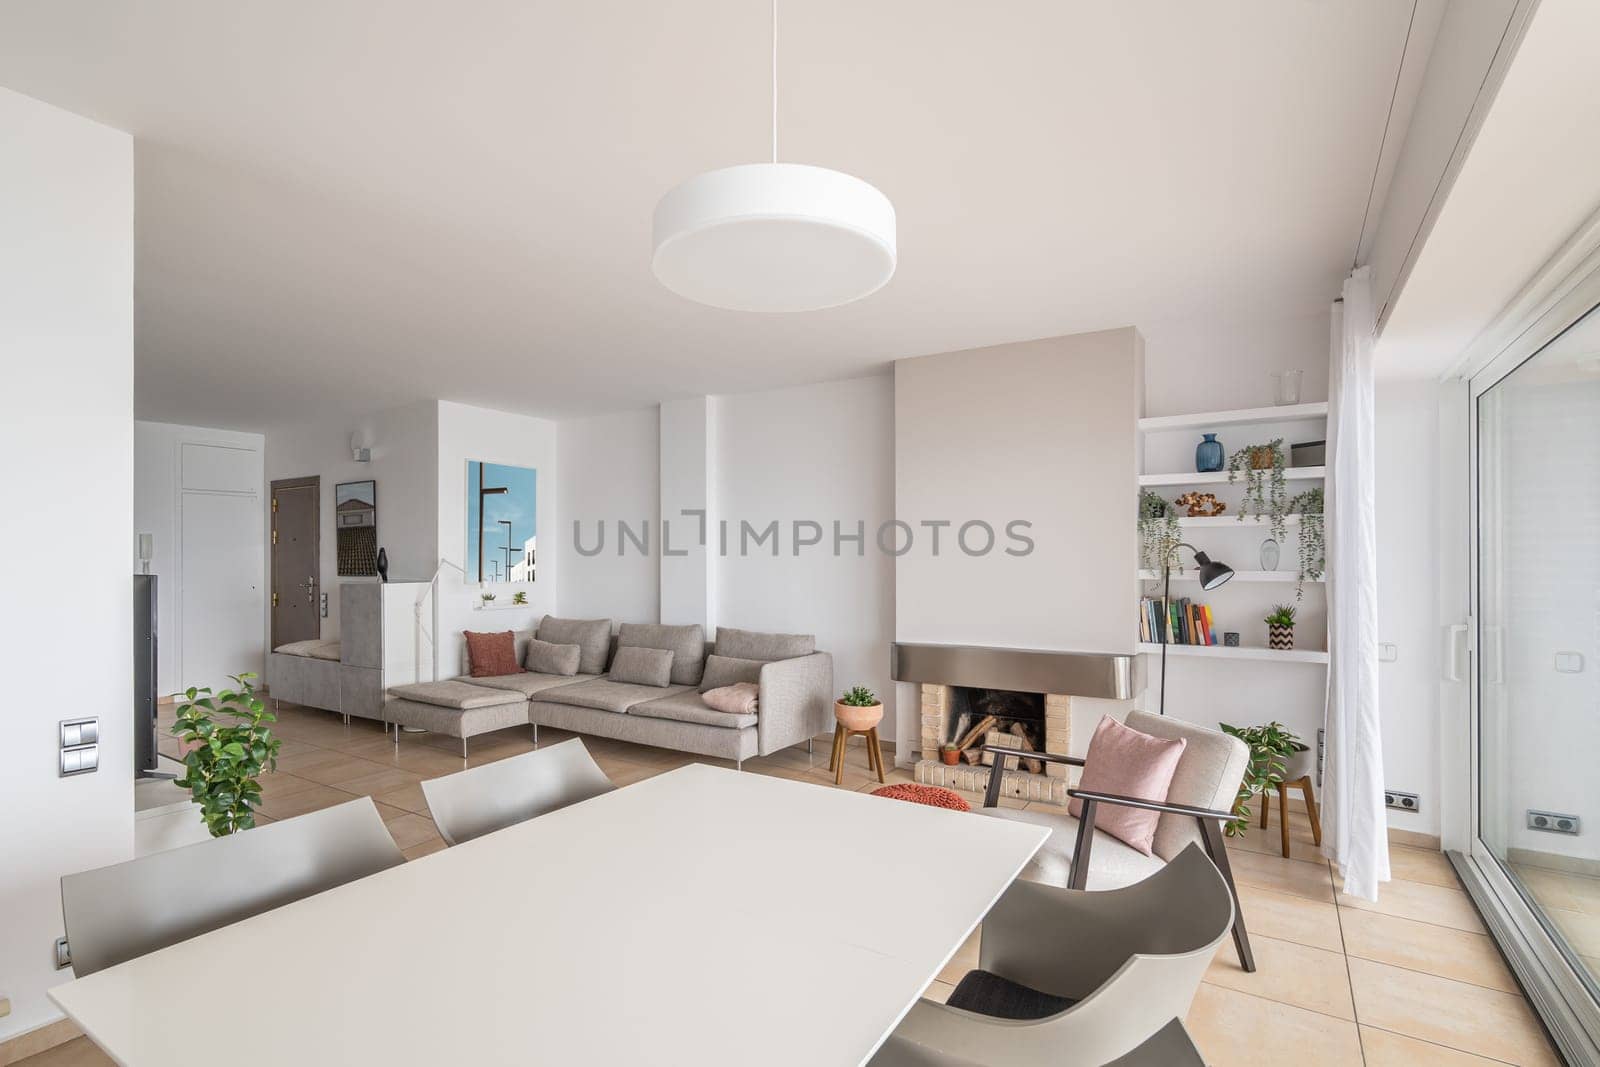 Dining table and and fireplace in renovated smart apartment. Presenting idea of home space organization in residence. Minimalist house design